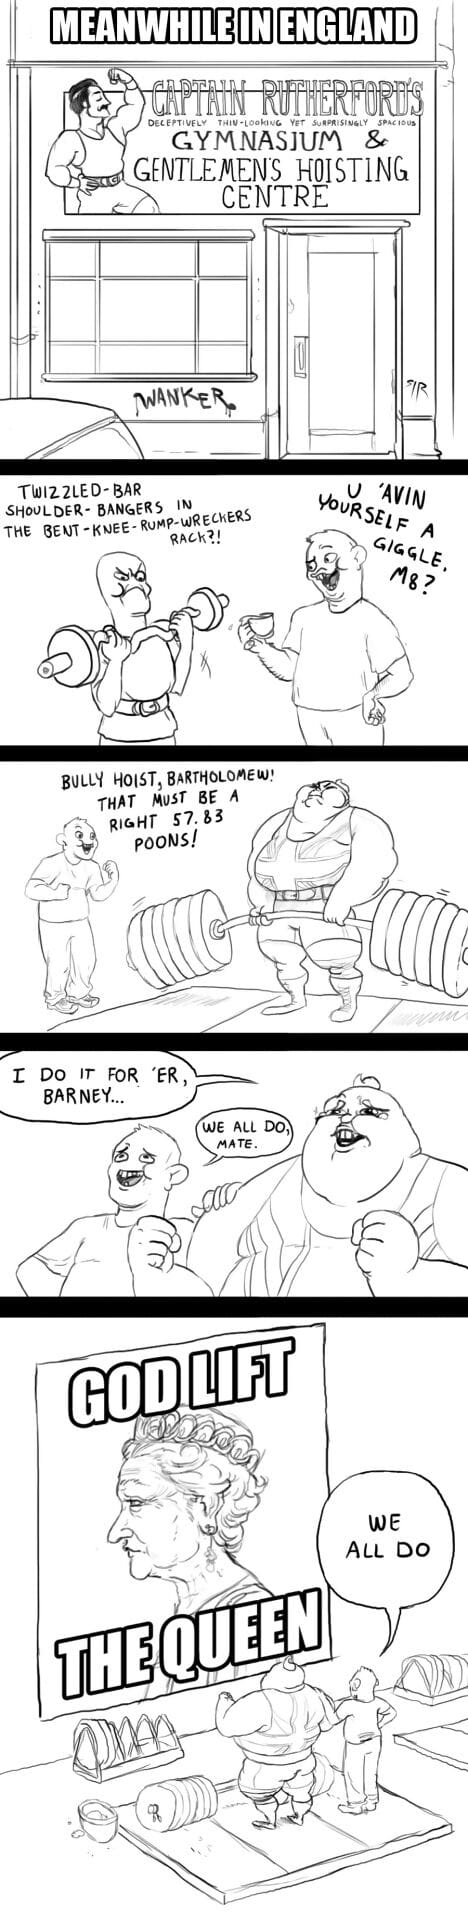 /fit/ コミック page 1